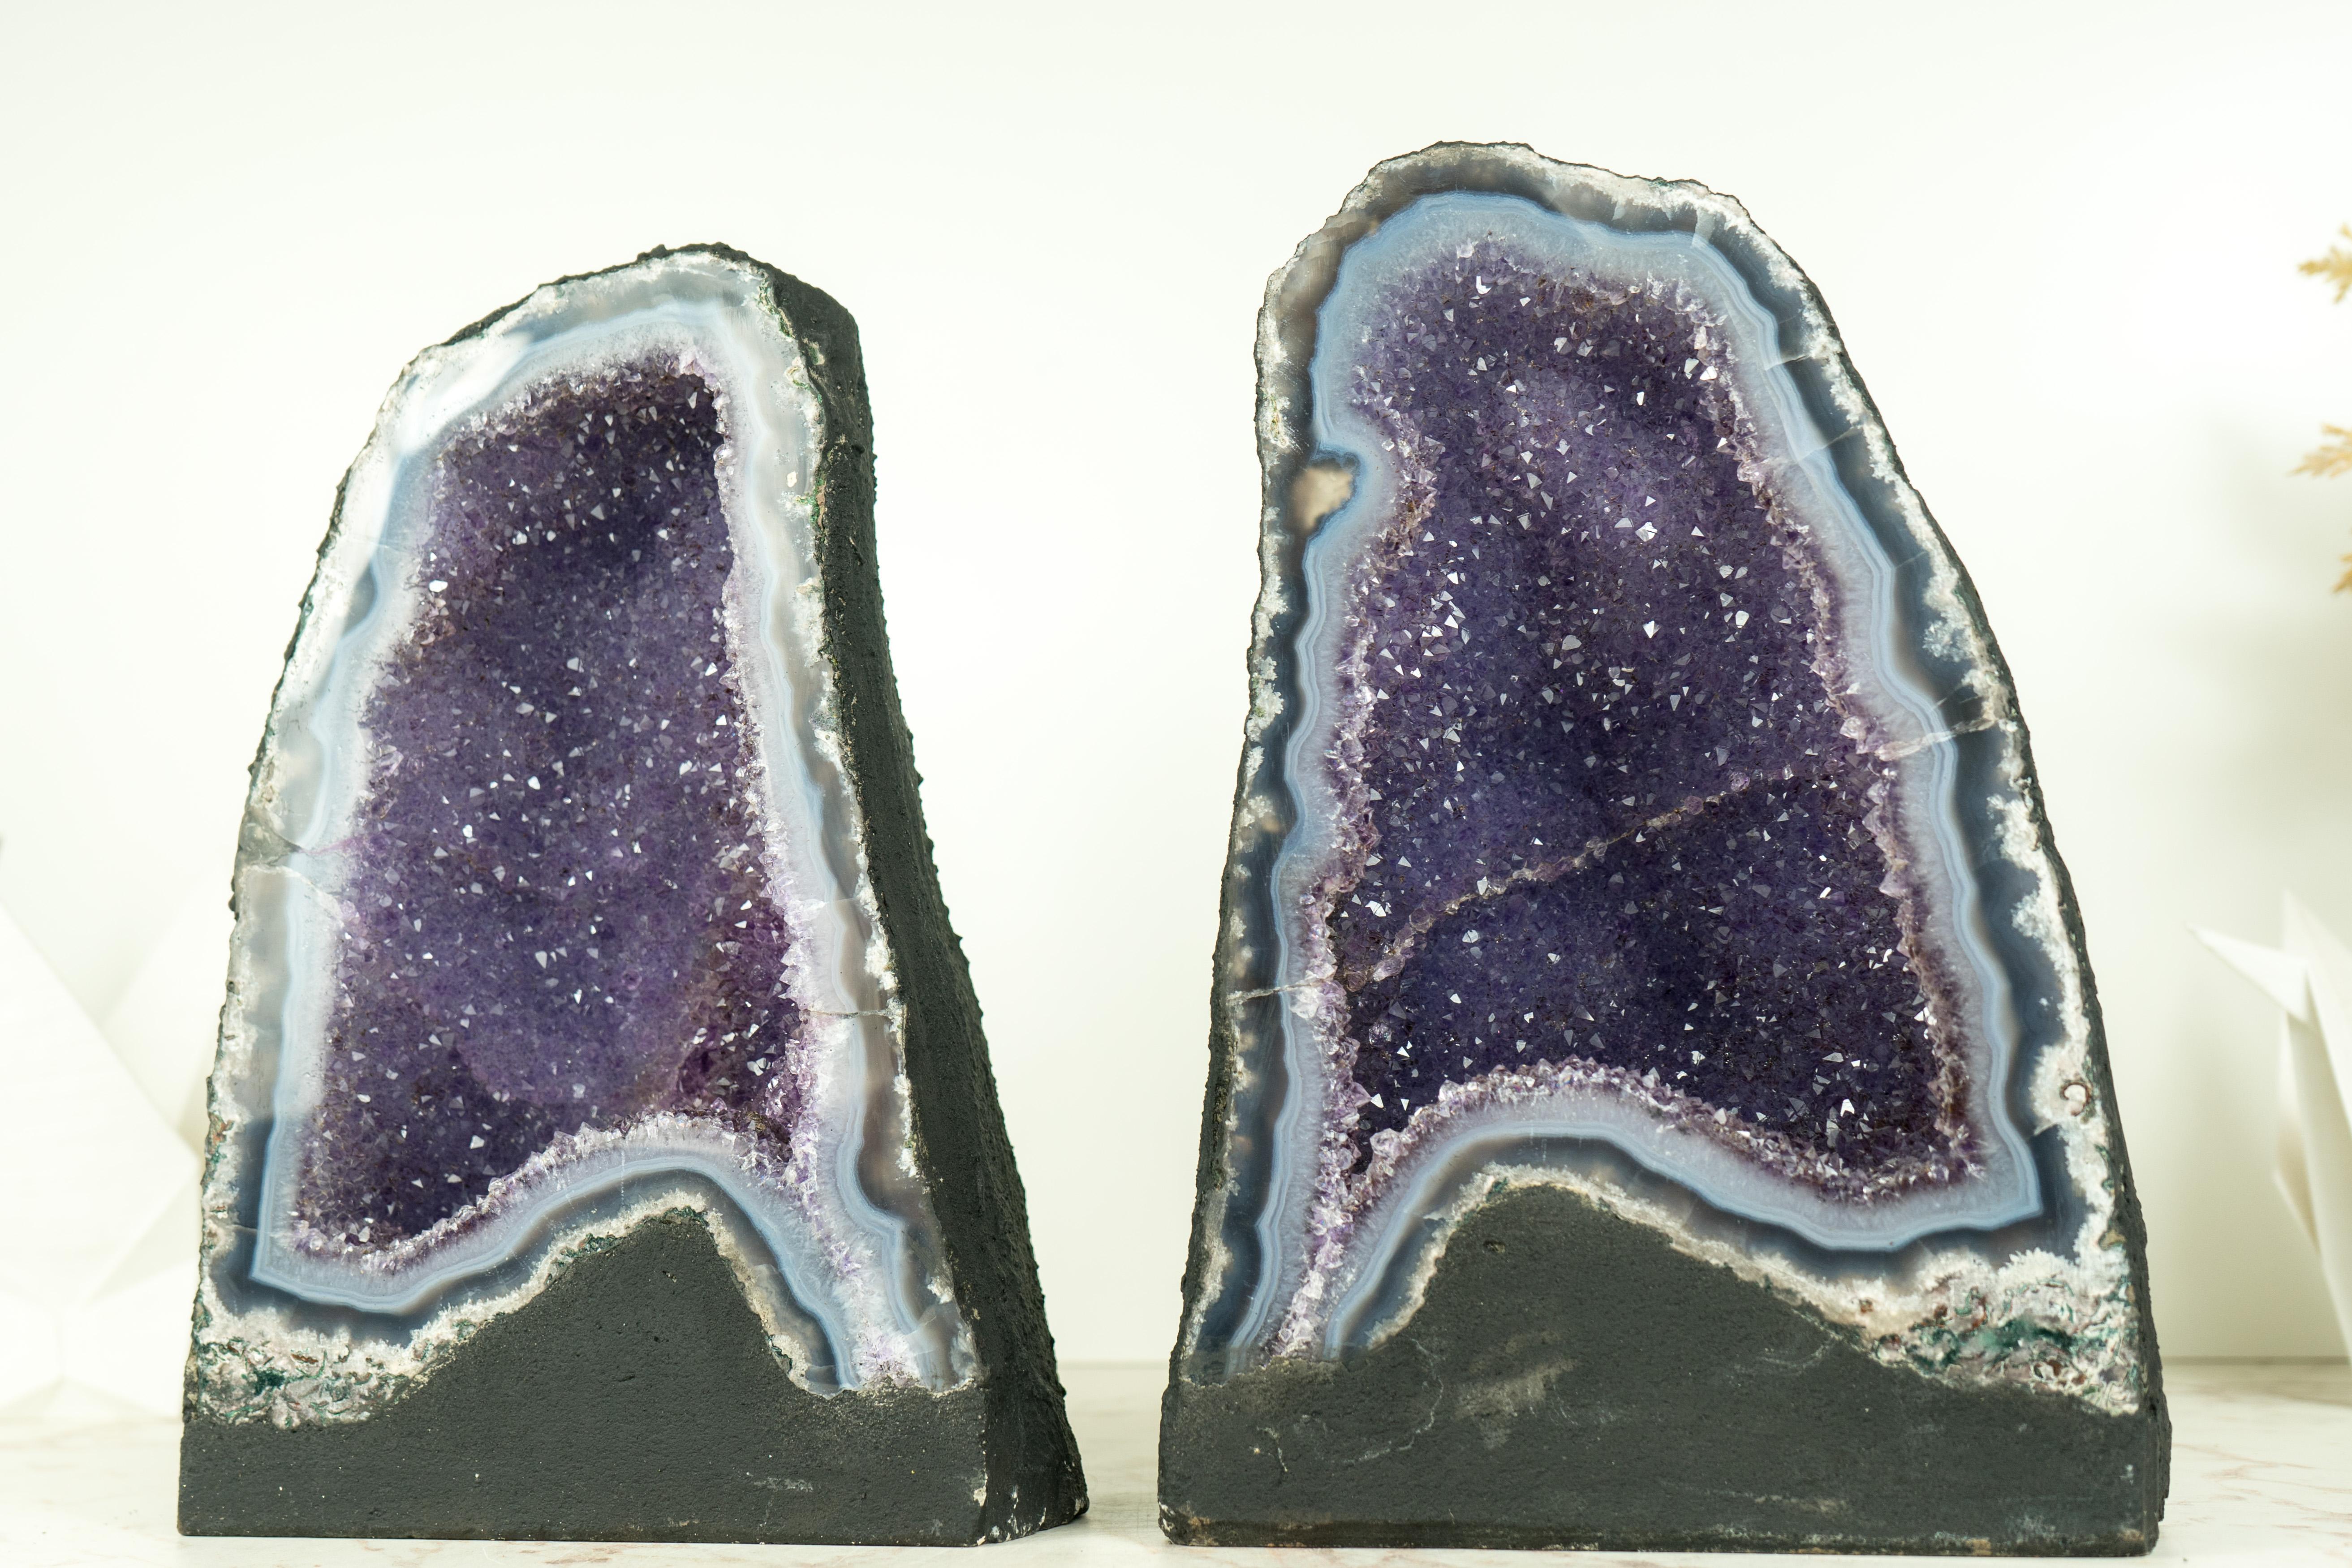 Pair of High-Grade Small Blue Lace Agate Geodes with Sparkly Lavender Amethyst For Sale 5